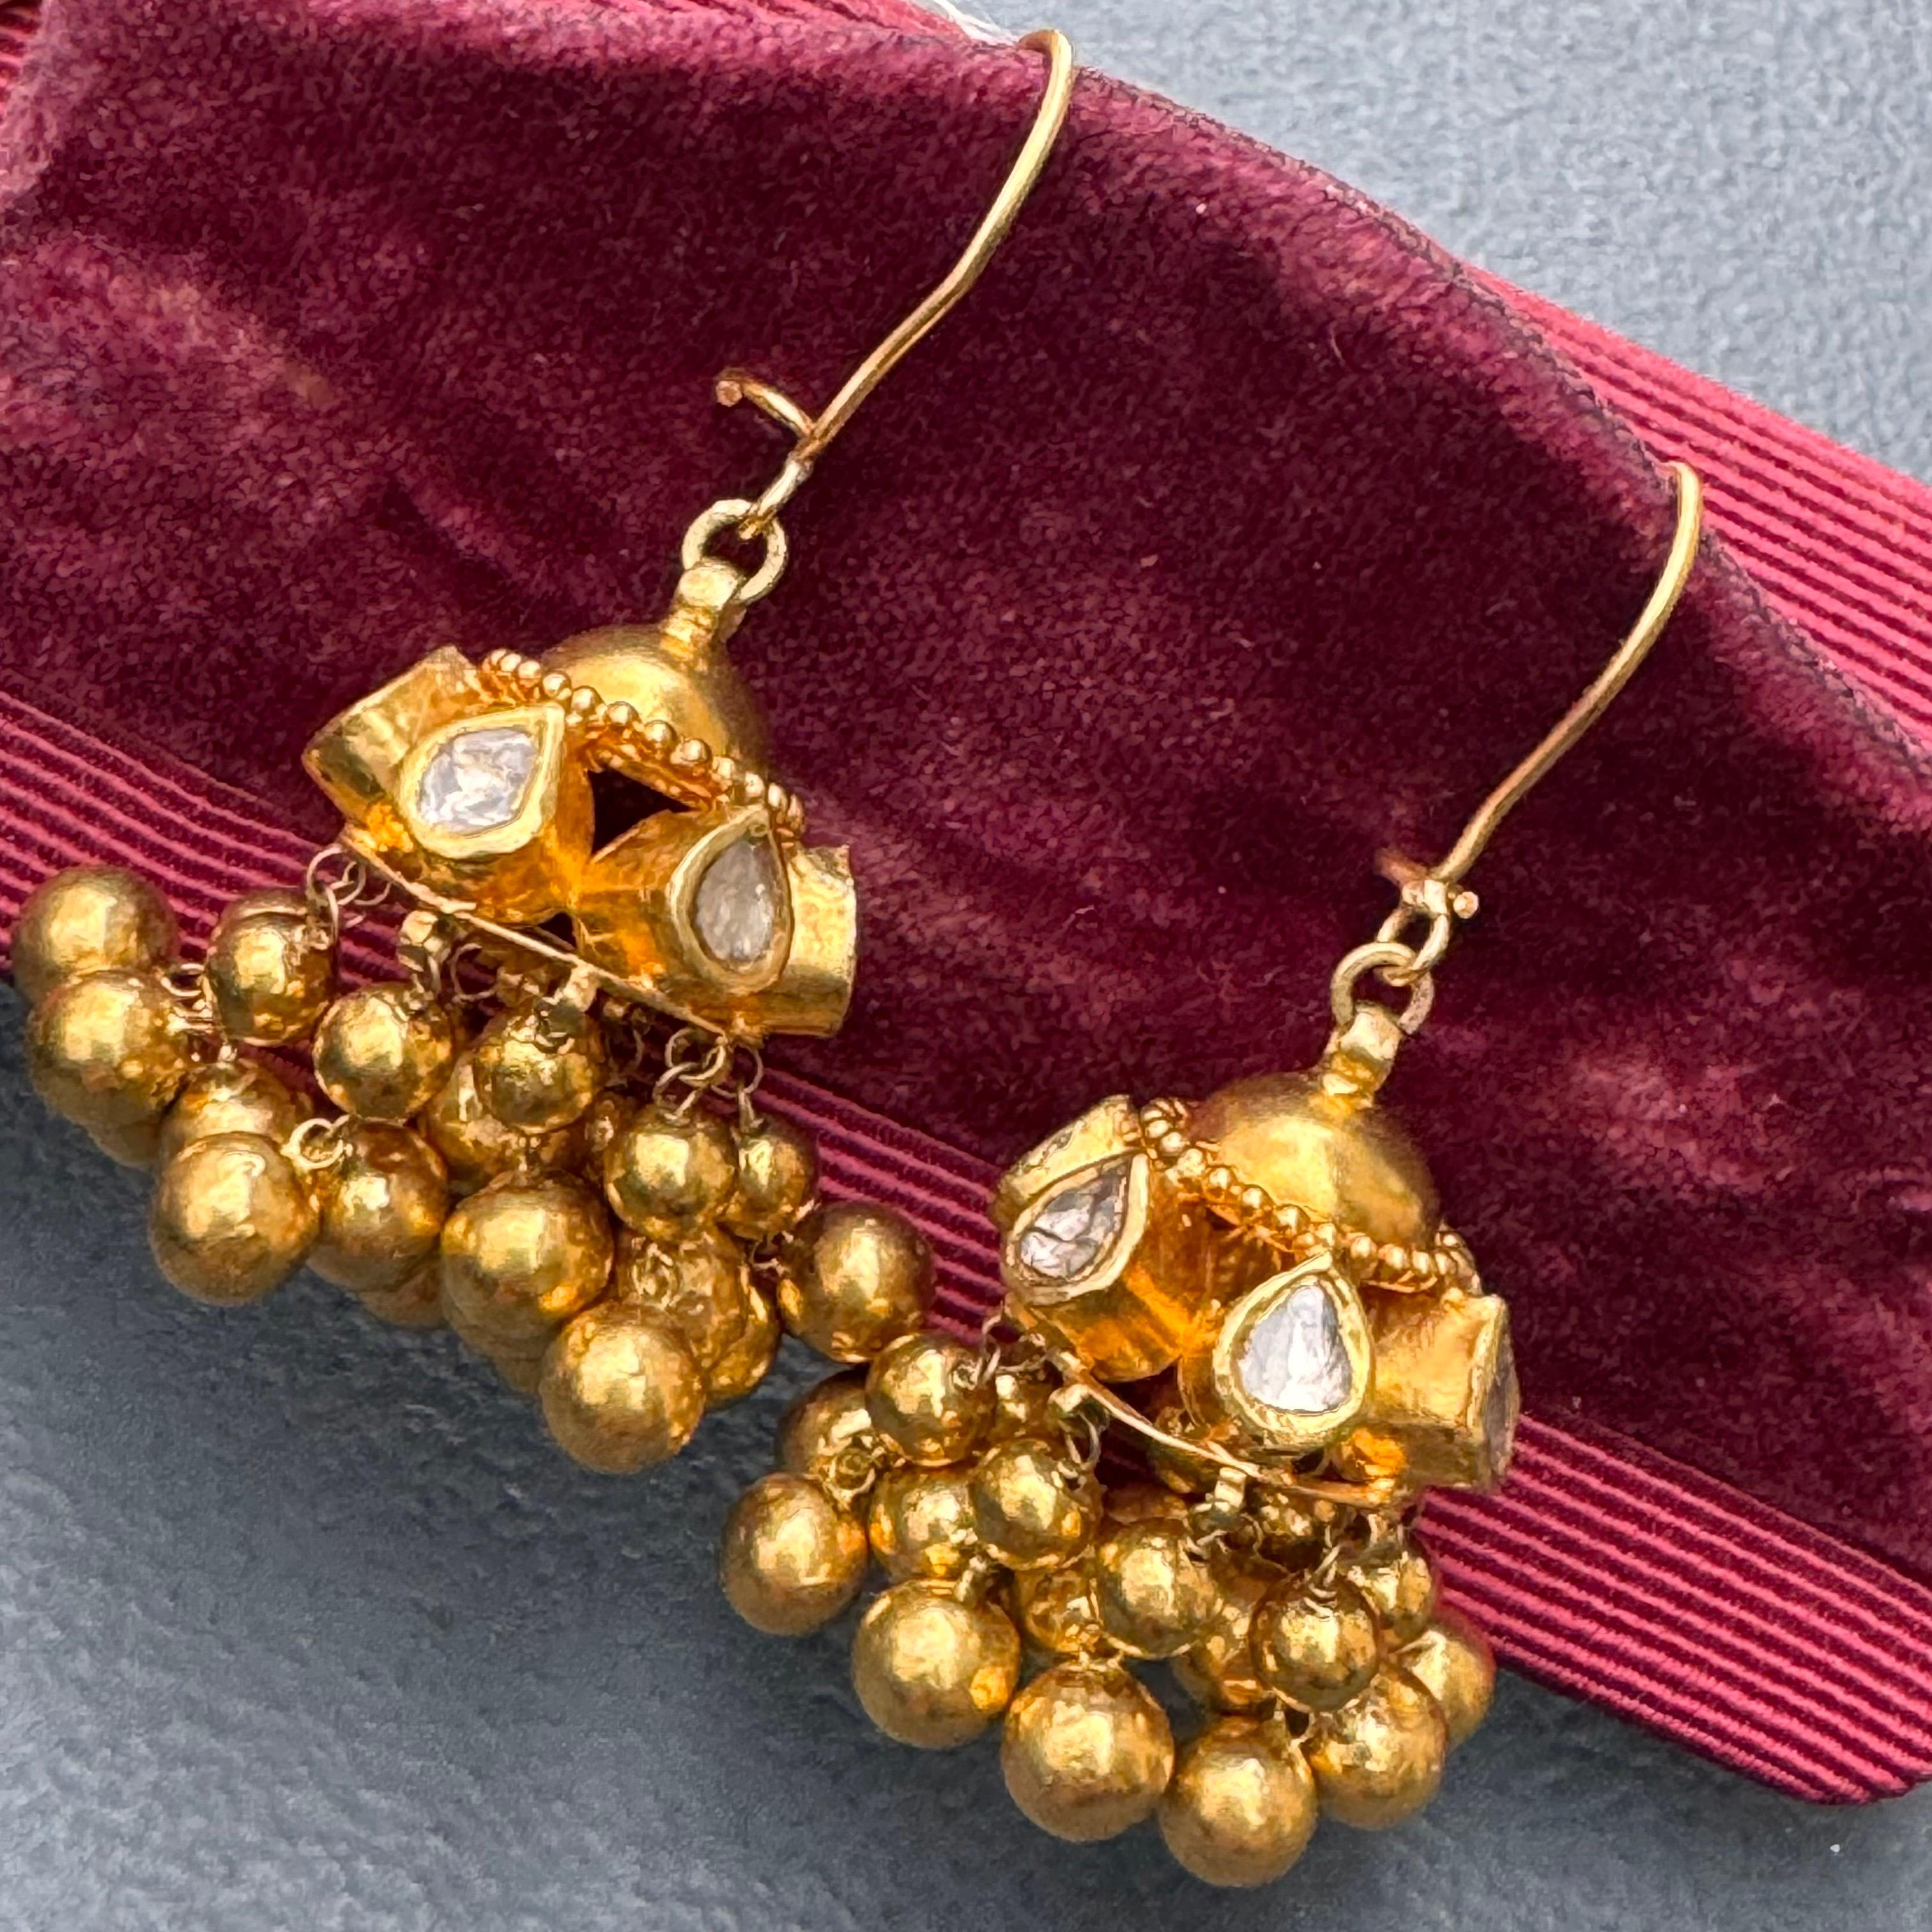 Heavy Vintage  Handmade 21kt solid gold ,Genuine Diamonds Chandelier dangle /drop earrings for pierced ears . Extremely well made with beautiful details .
There are total of 12 rose cut diamonds approximately 1.80 cttw which are bezel set in 21k